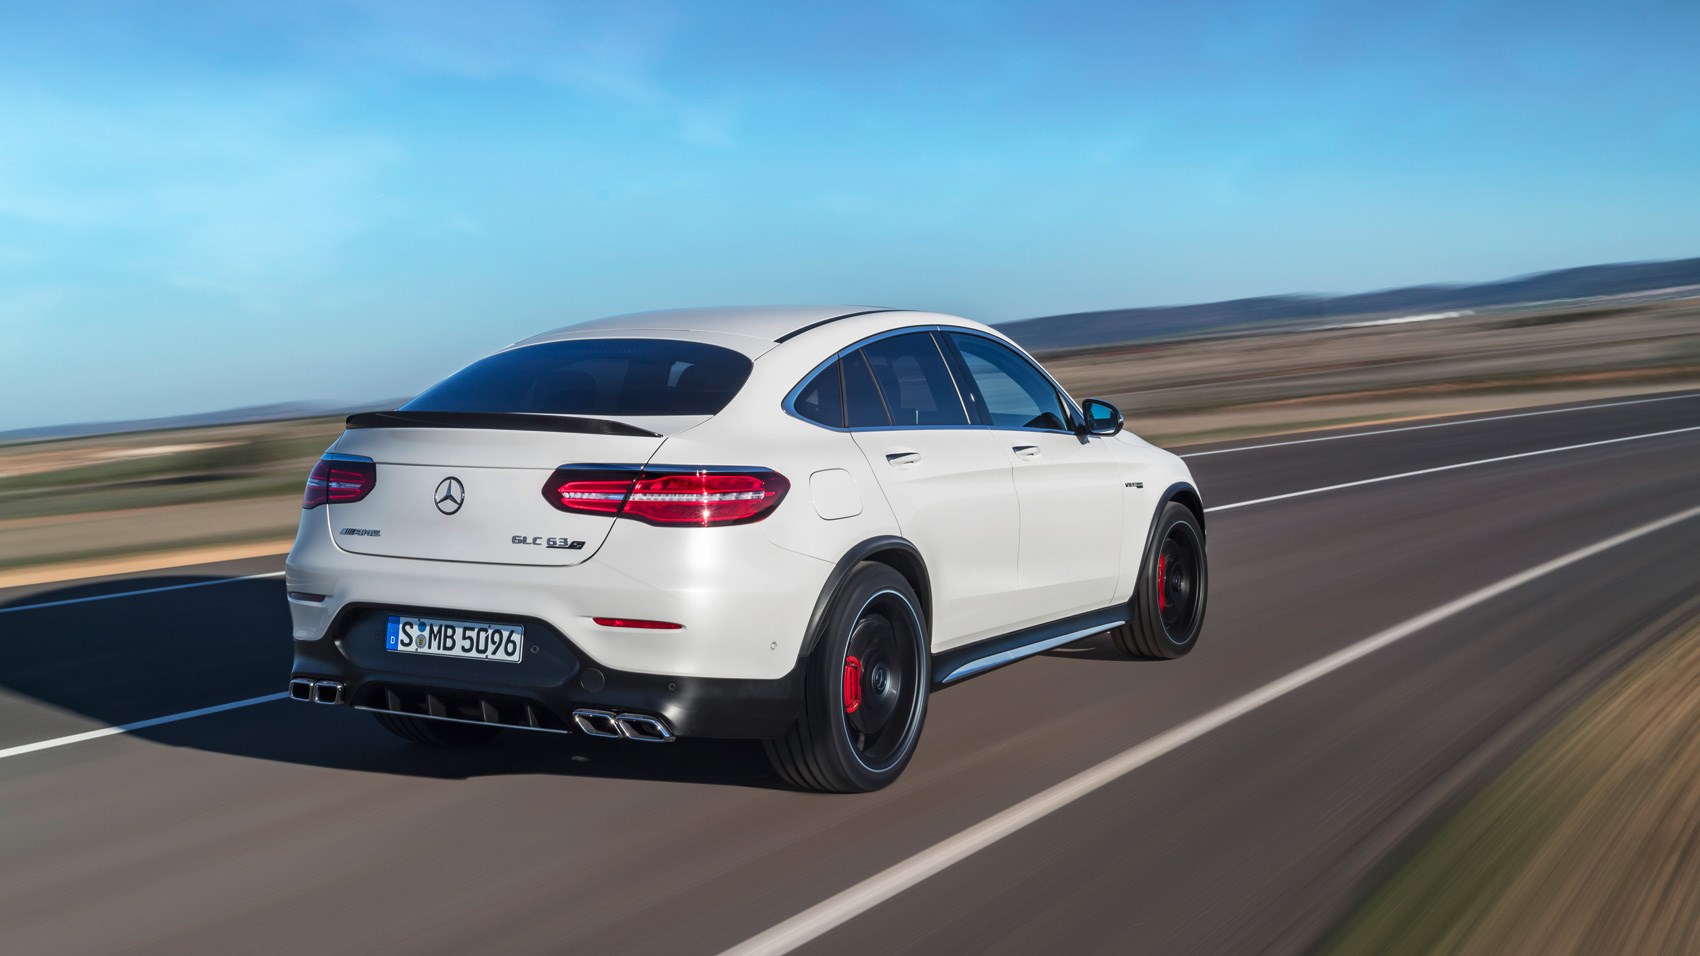 Mercedes Amg Glc63 S Review As Subtle As A Sledgehammer